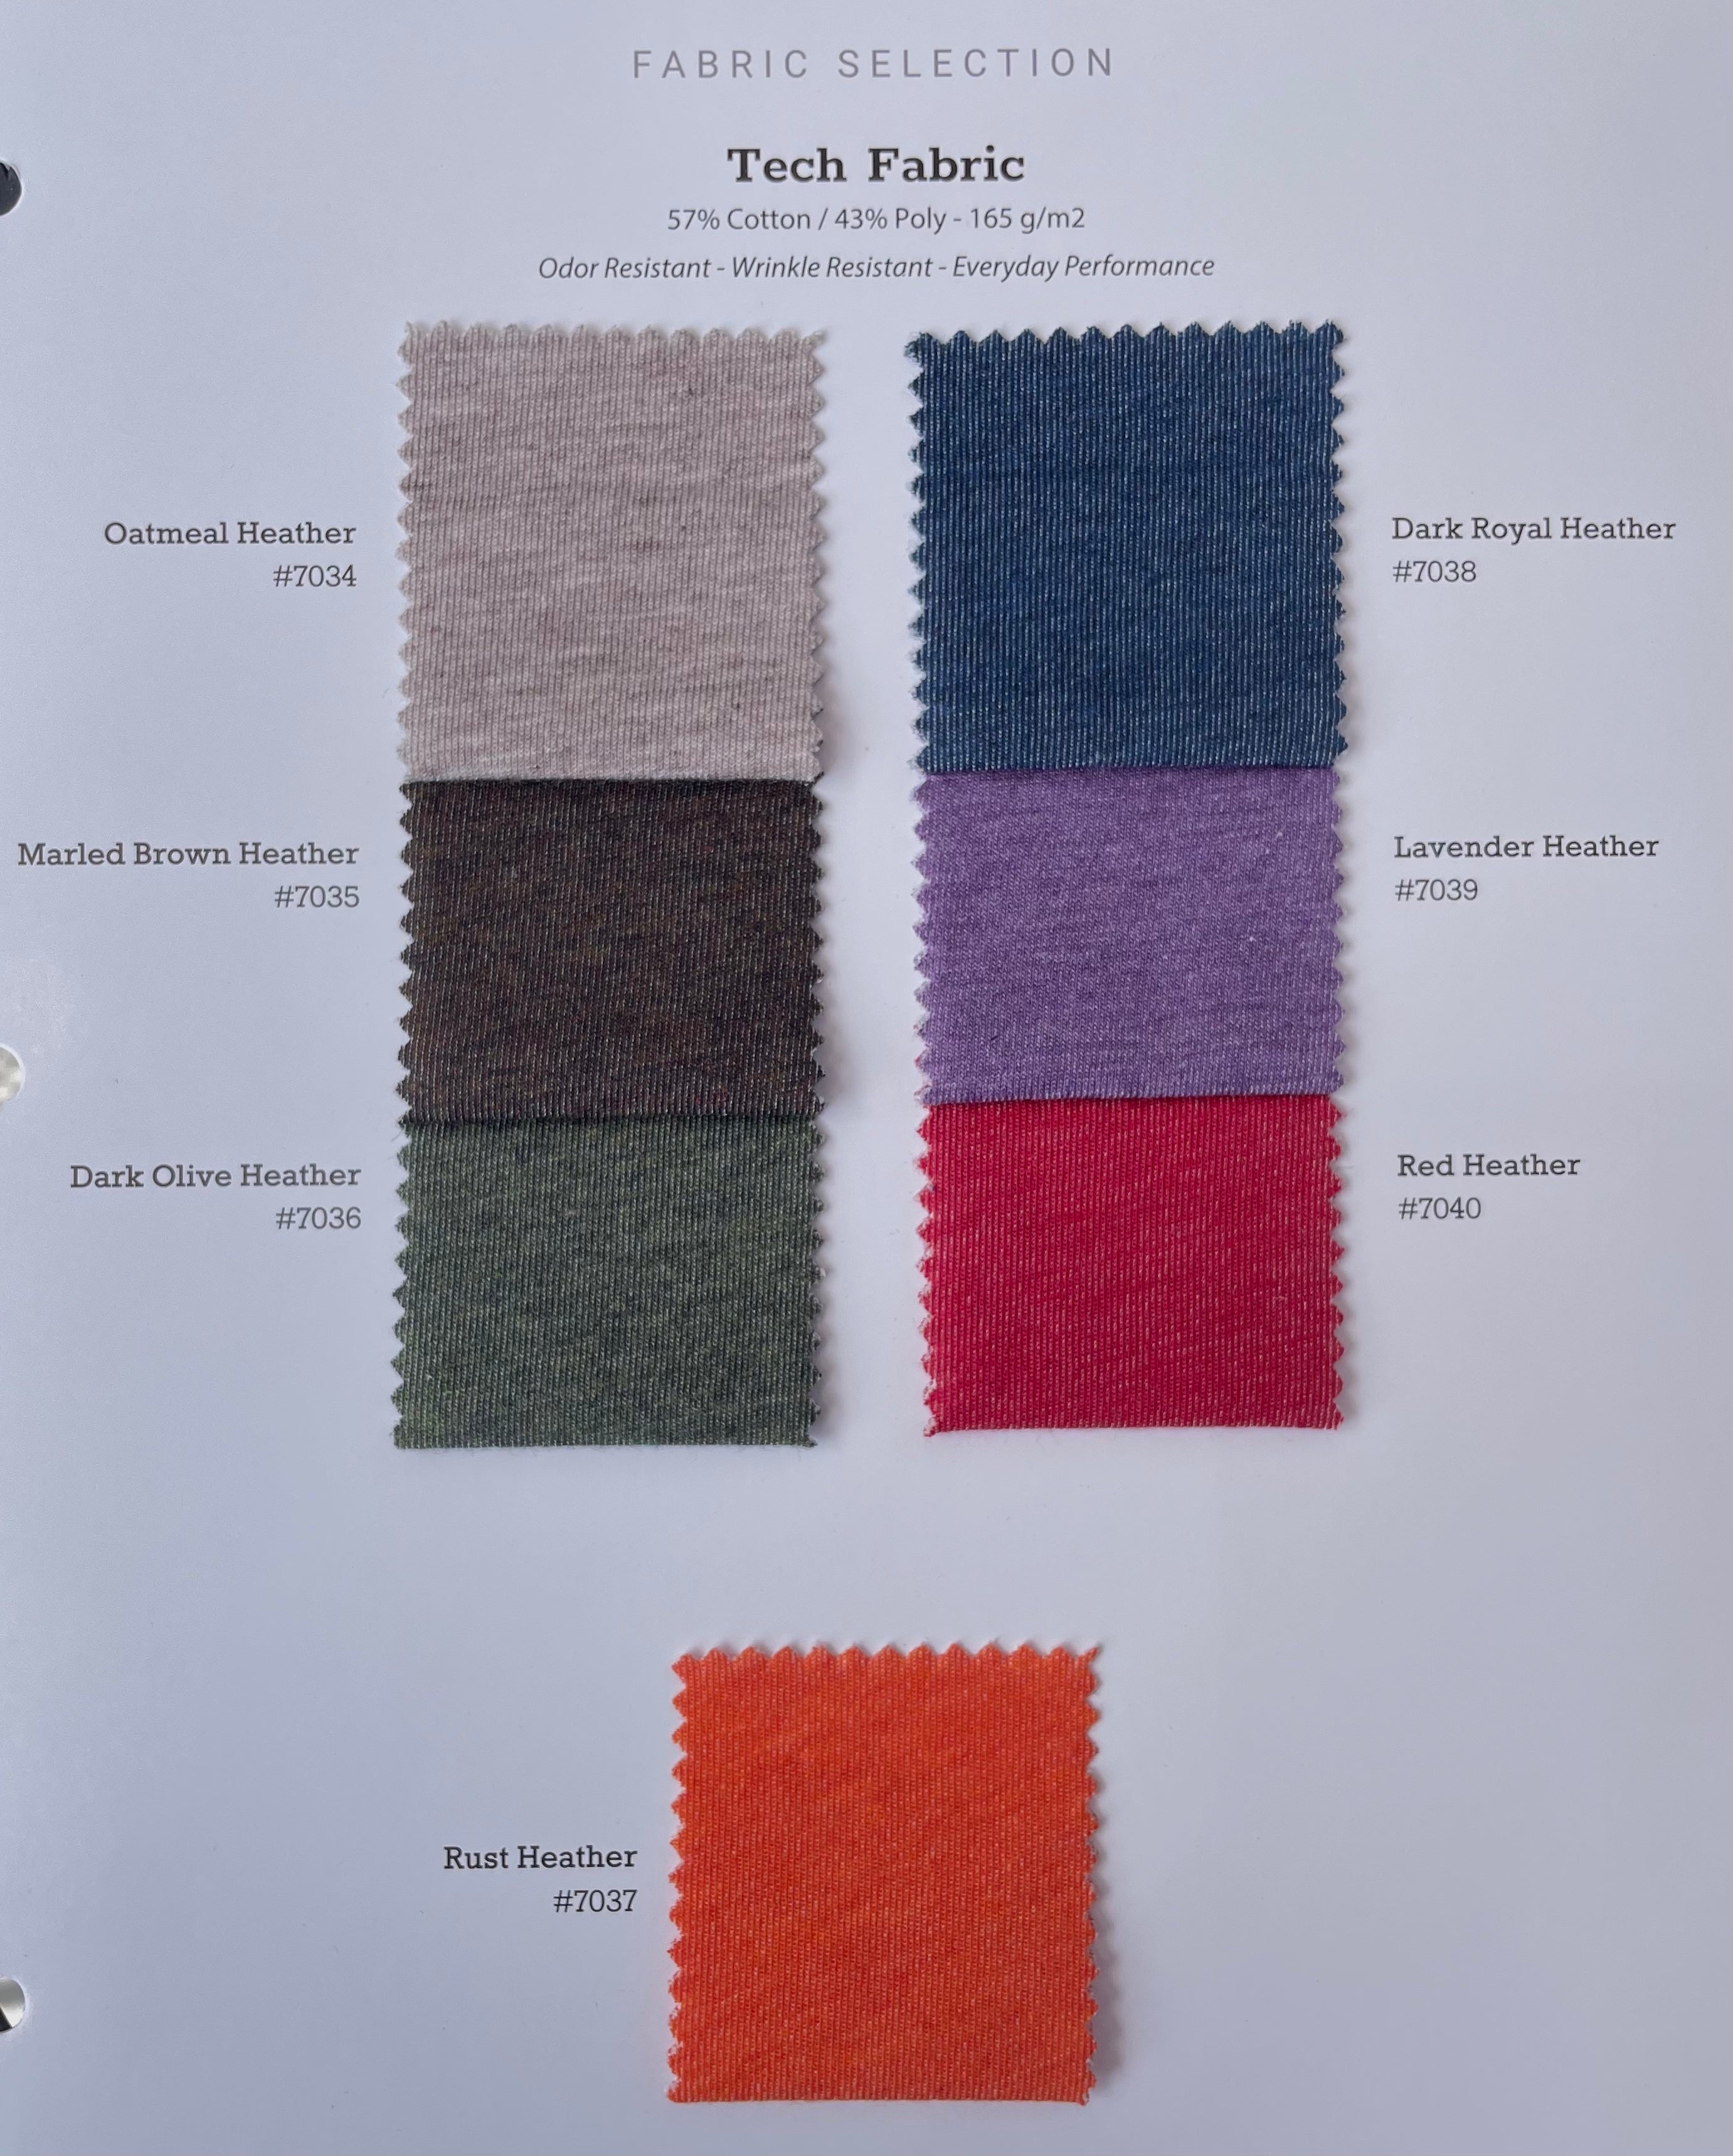 Fall 2021 Tech Fabric Swatches